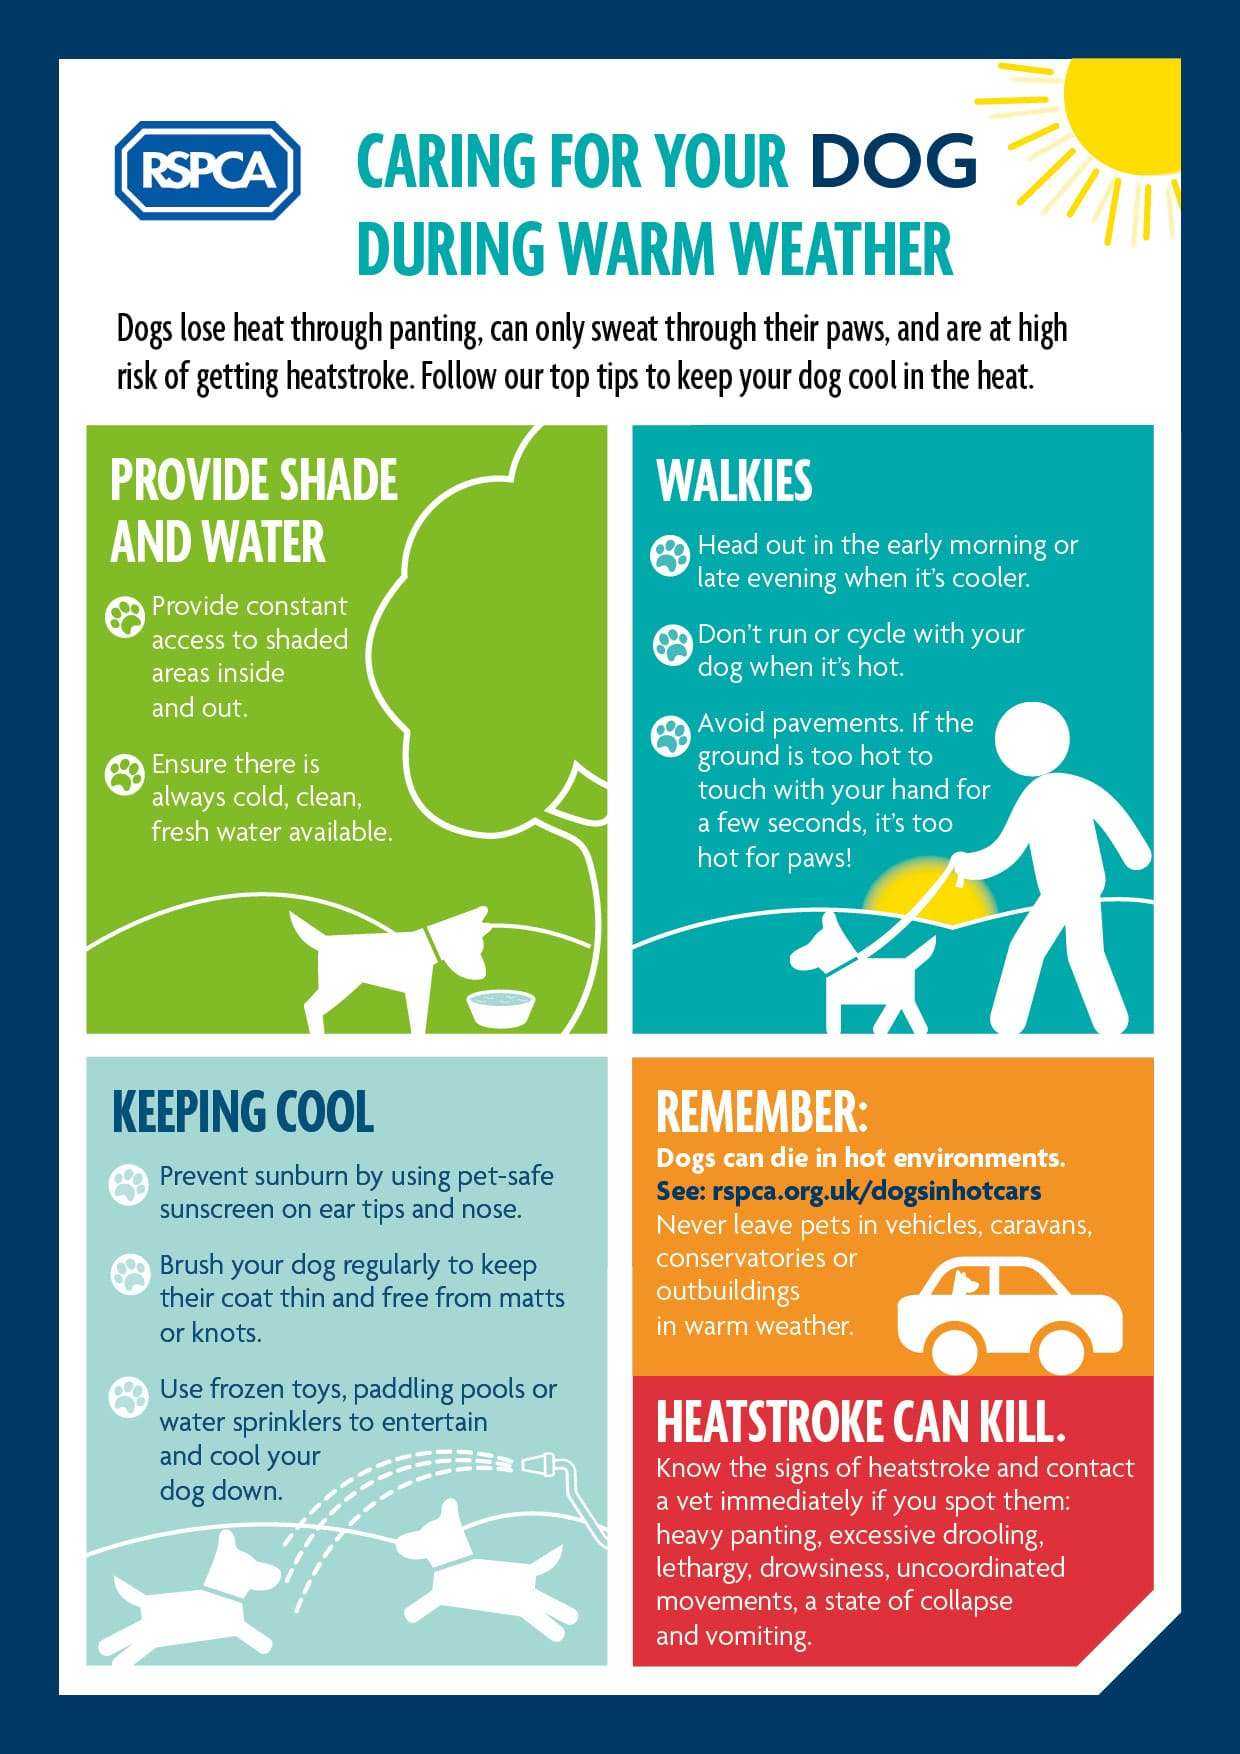 Caring for your dog during warm weather infographic